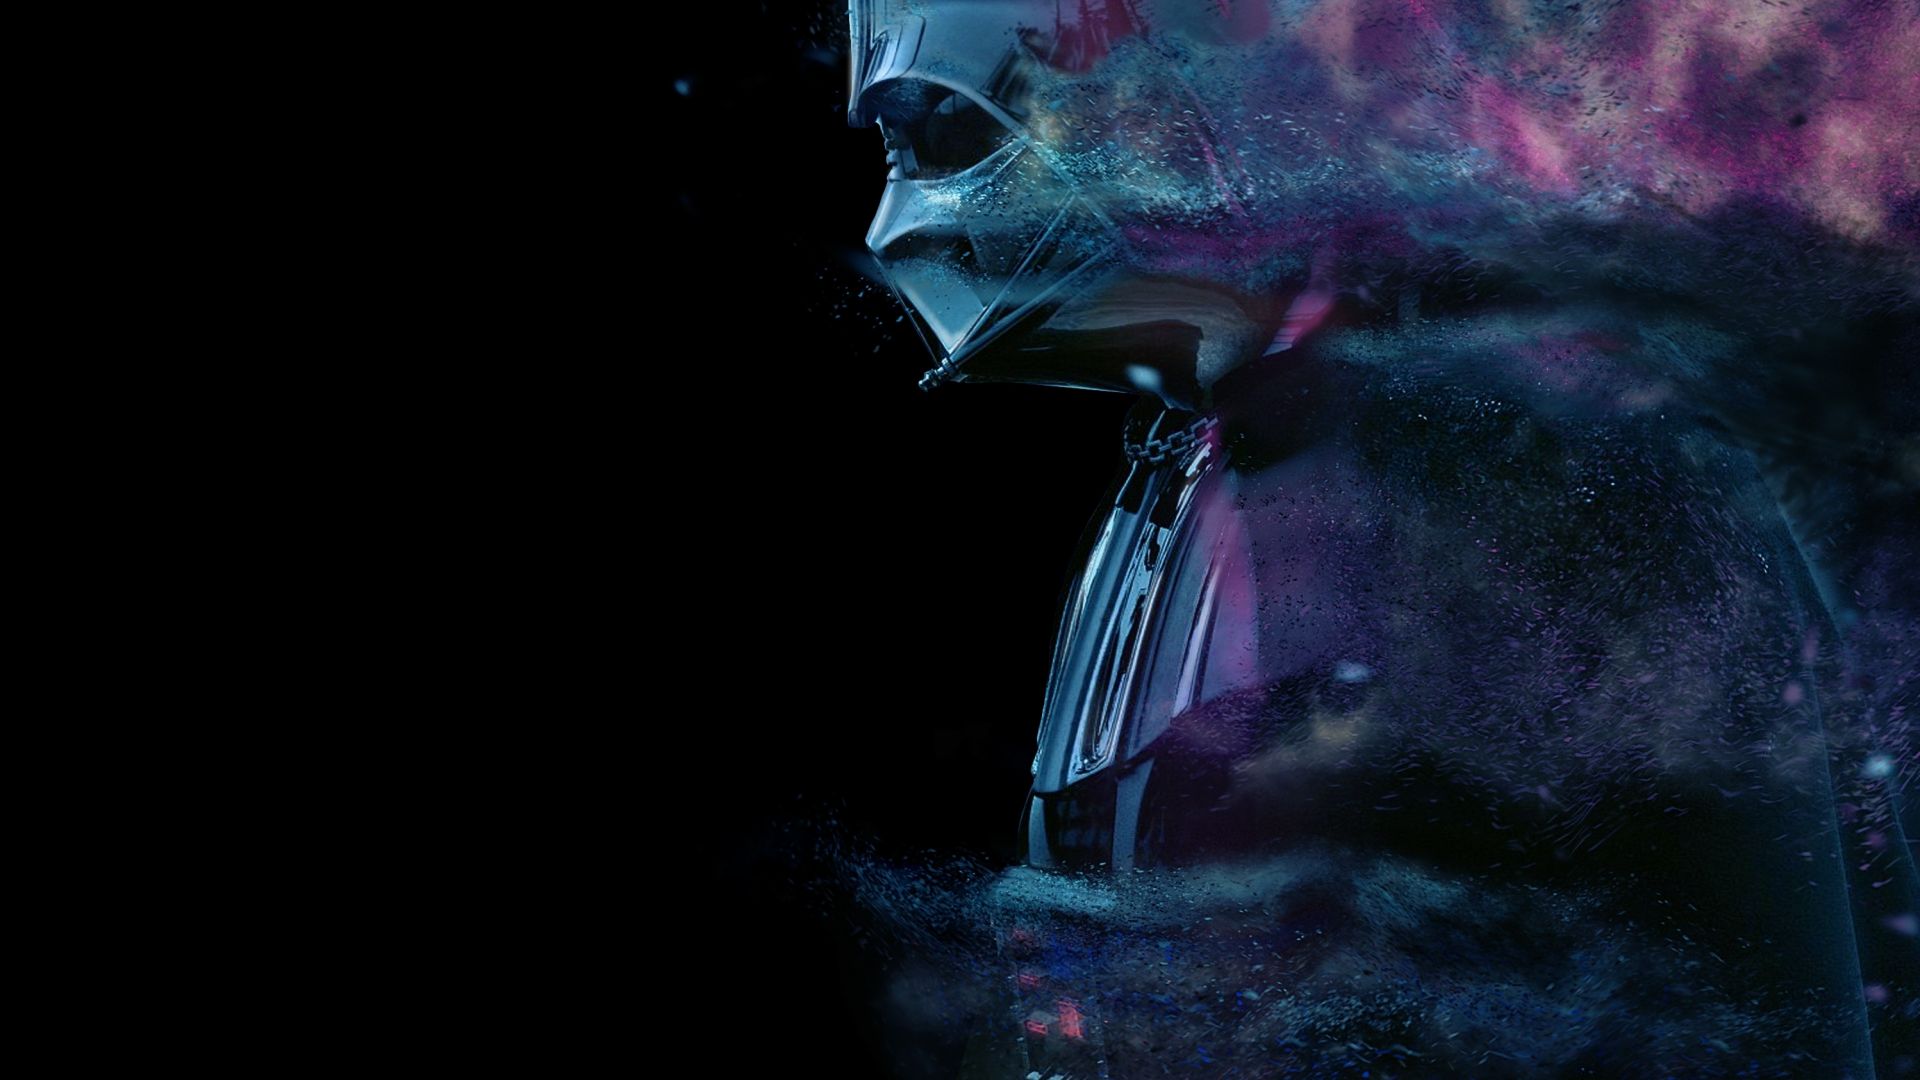 Fading away, star wars, darth vader wallpaper, HD image, picture, background, 3277fb